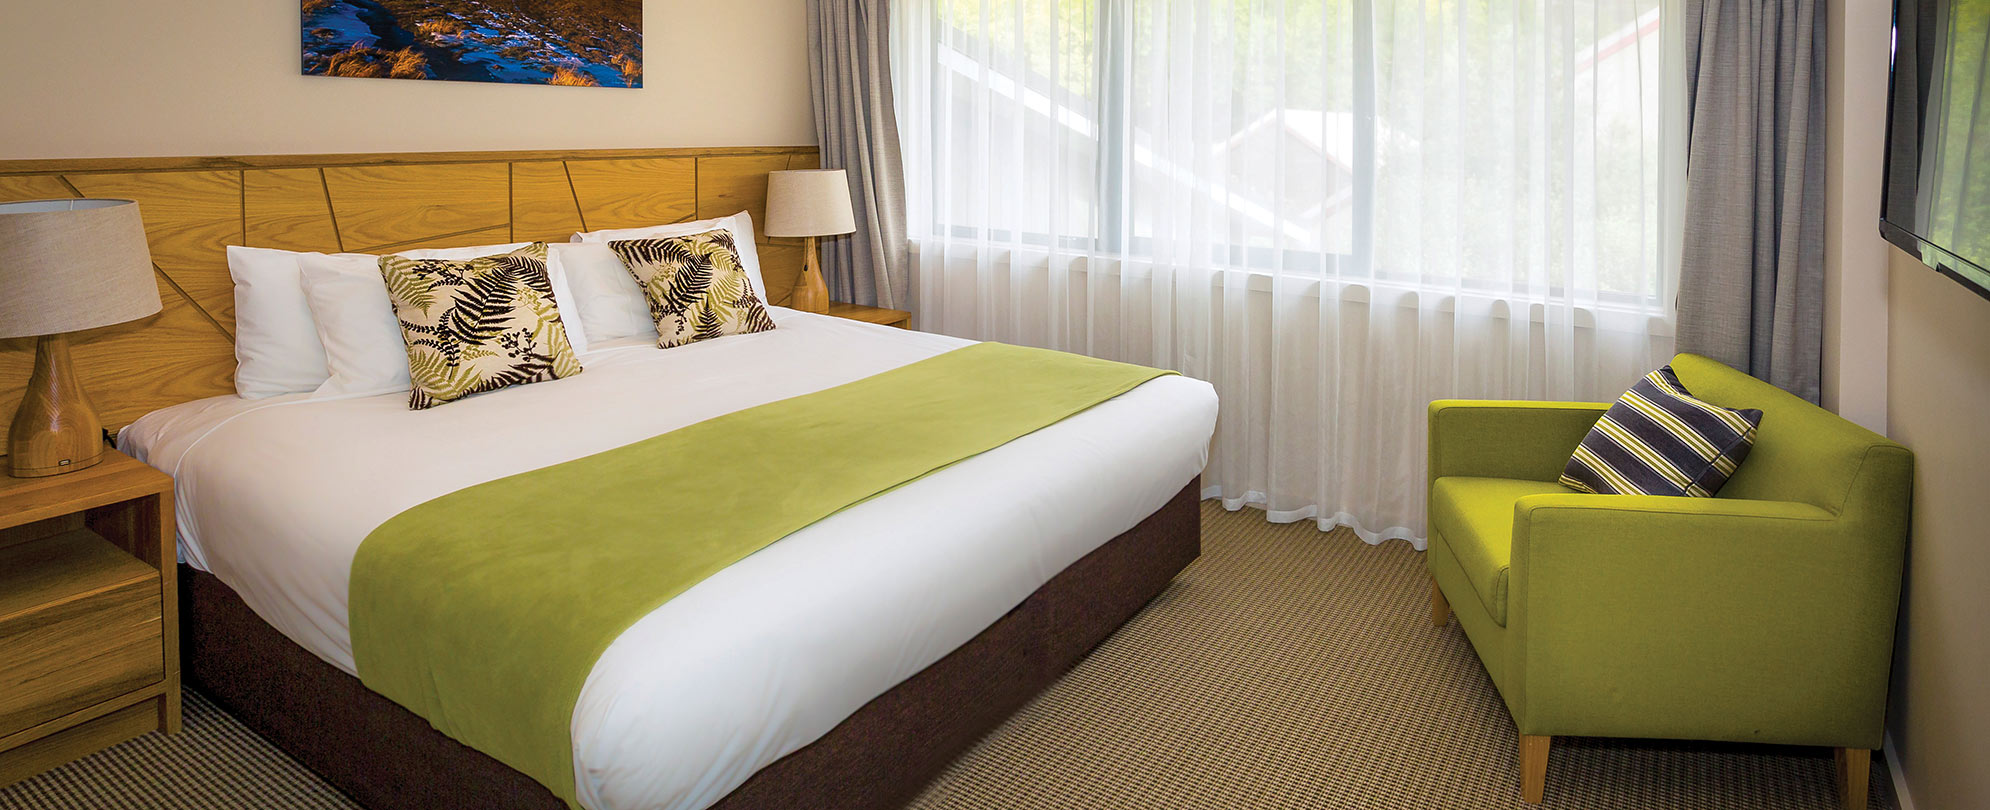 The master bedroom of a 3-bedroom suite at Club Wyndham Wanaka.